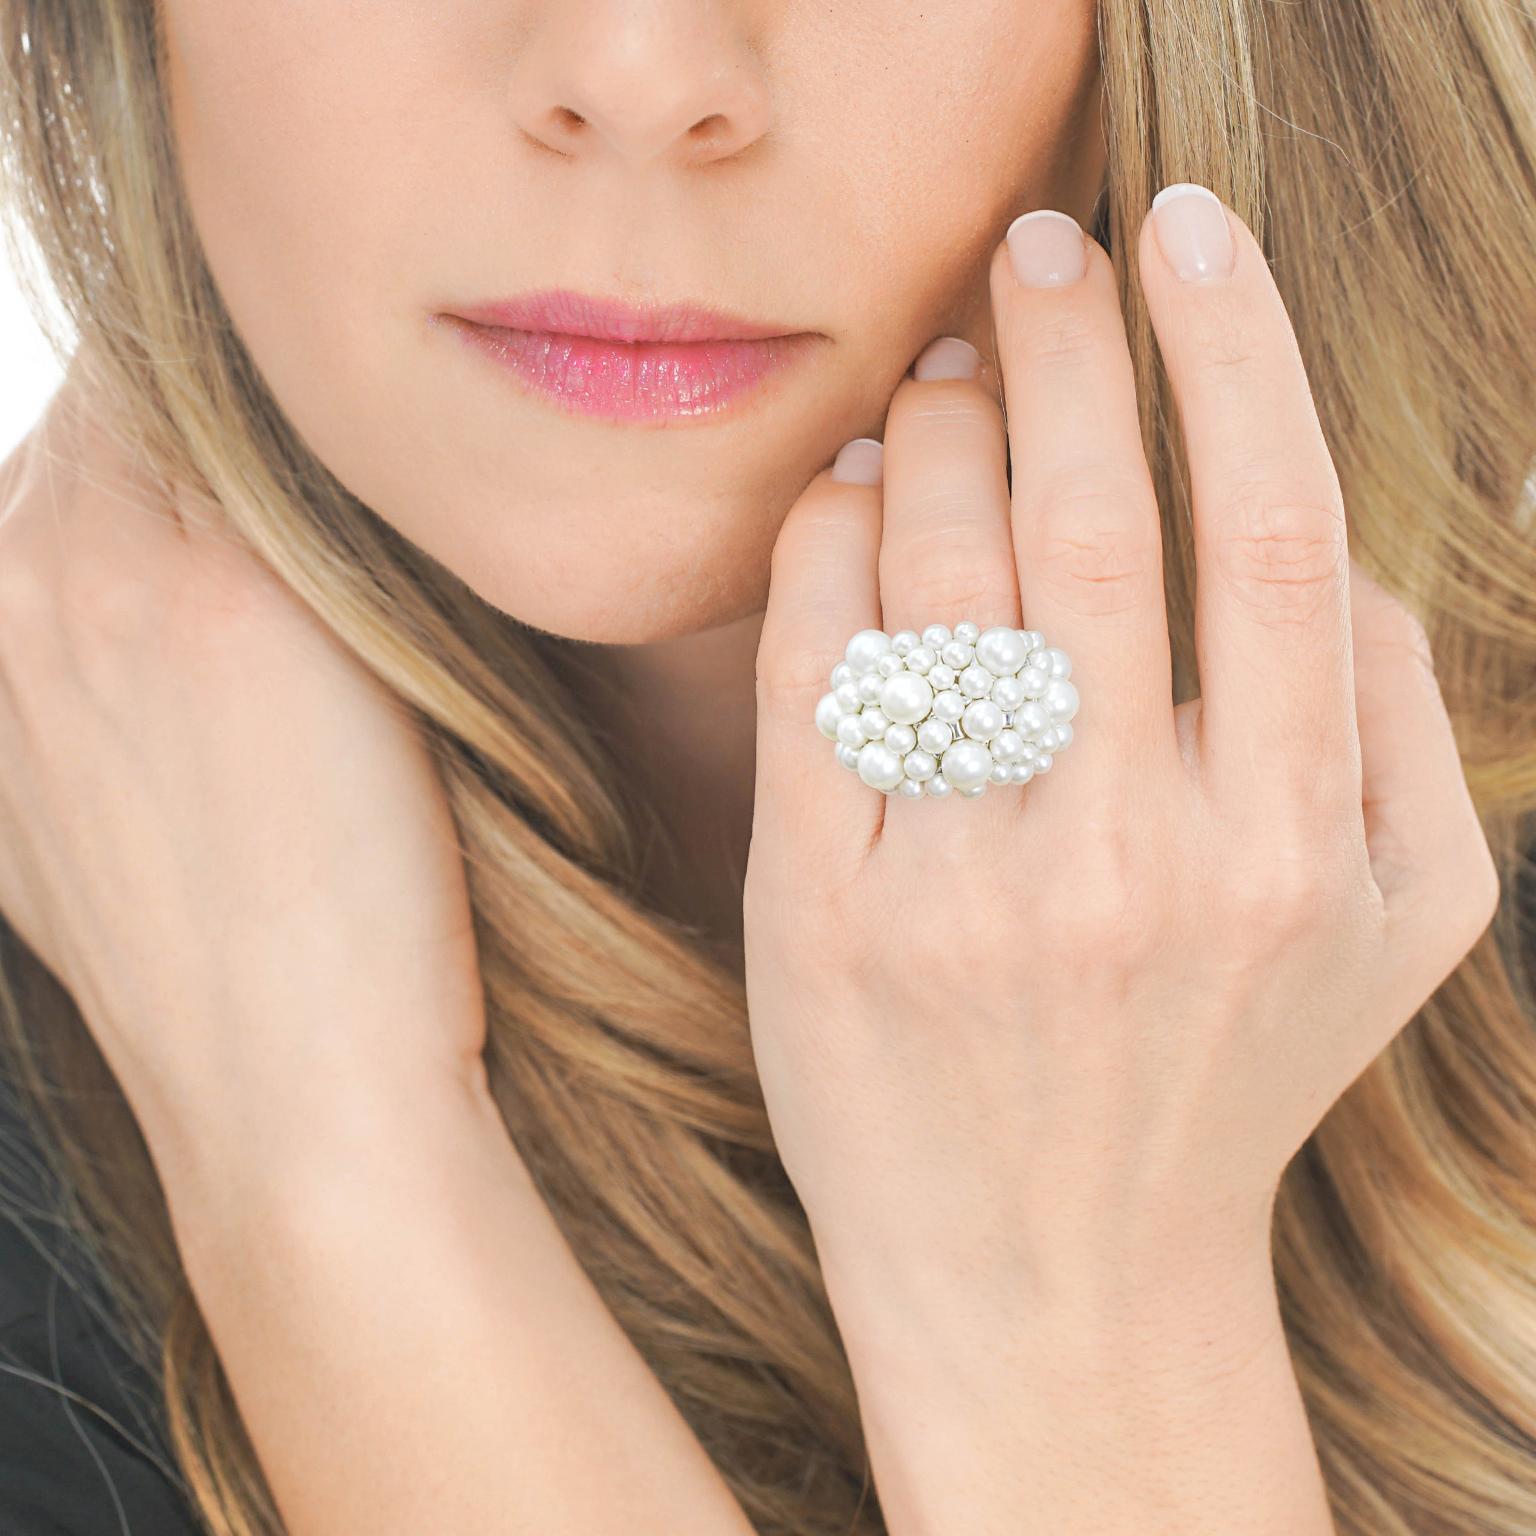 Circa 2000s, by Mimi Milano, Italy.  This spectacular pearl ring is brilliant everyday chic. This Italian design ring features an elegant sufficiency of luminescent pearls in many sizes. The look is beachy casual for everywhere but the beach! 